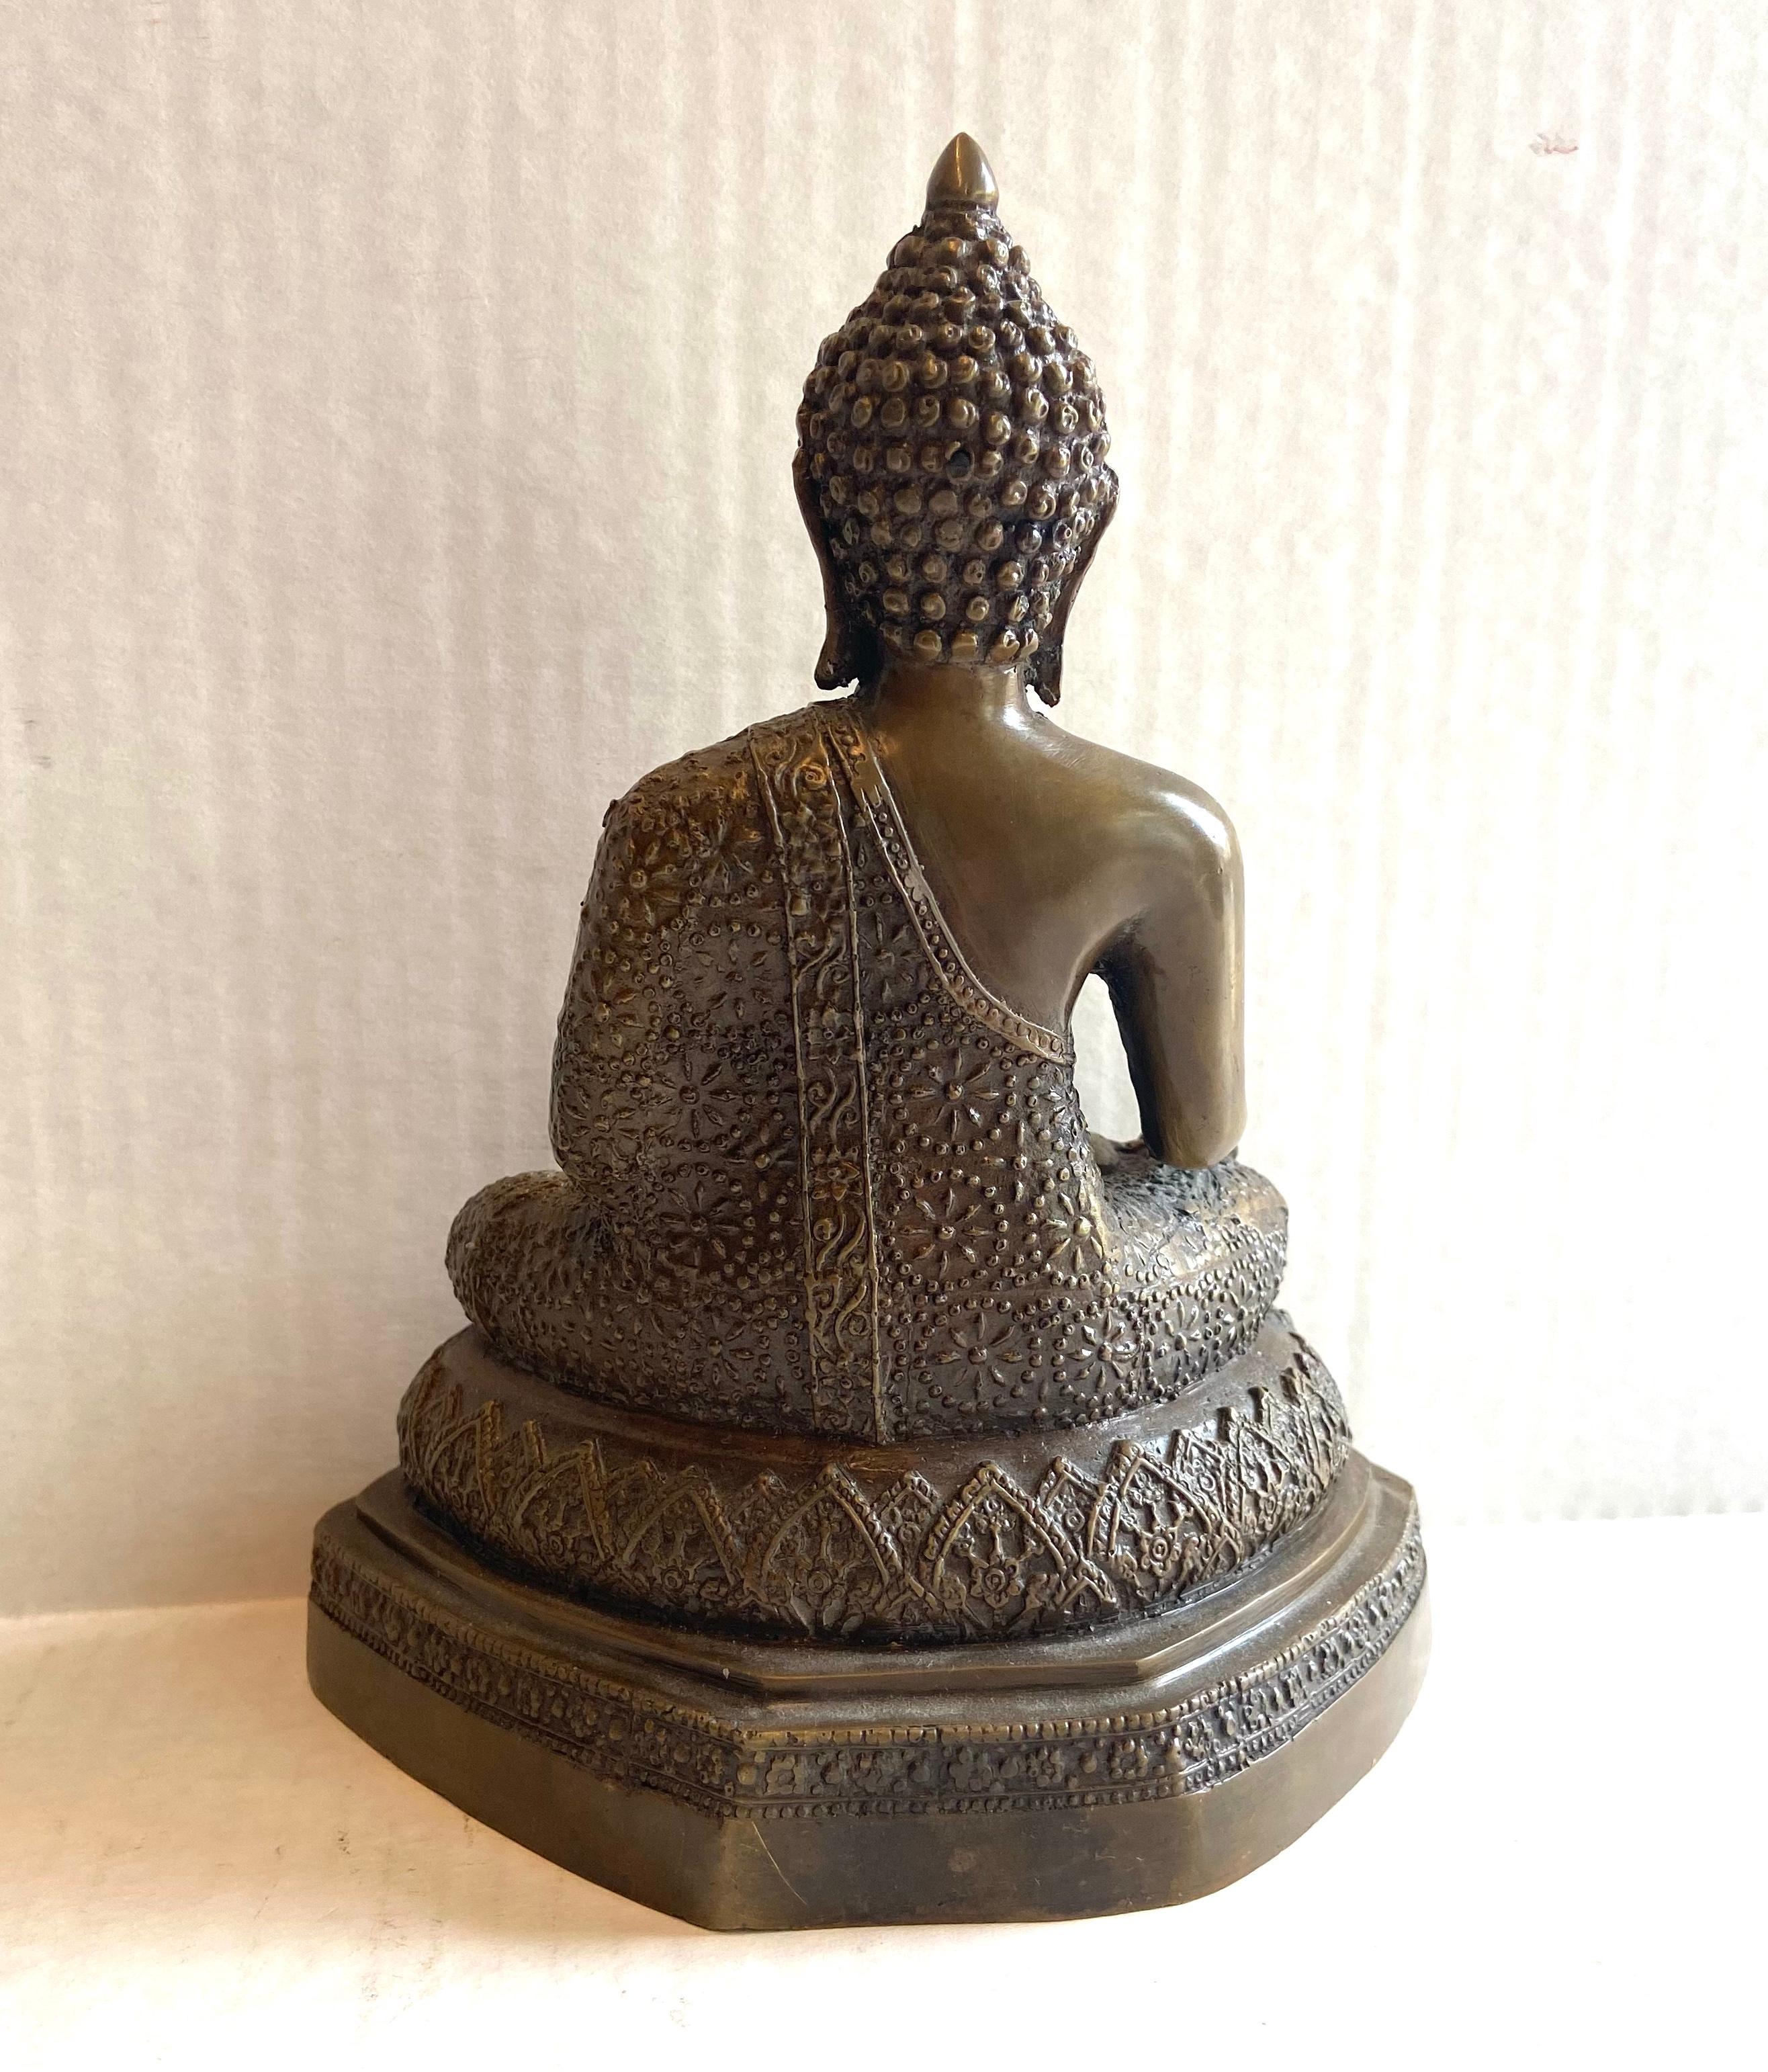 The Thai Buddhas are always represented with different physical attributes, specified dress and specified poses. This particular one is the Buddha of Reasoning. The left arm is bent at the elbow and the wrist, with the palm facing outwards and the